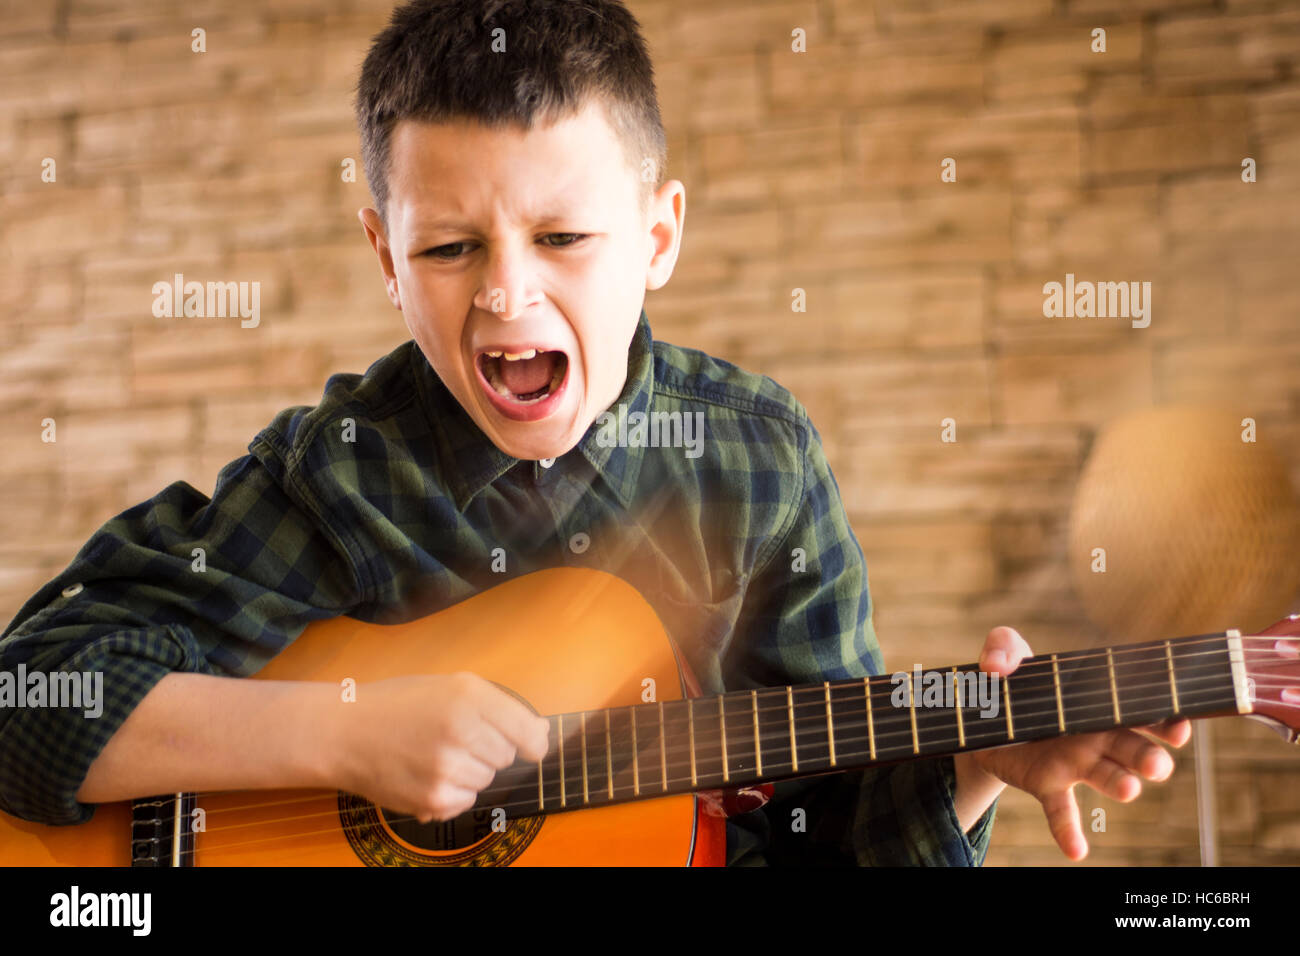 Young Boy Singing Out Loud While Playing Acoustic Guitar in Living Room Stock Photo